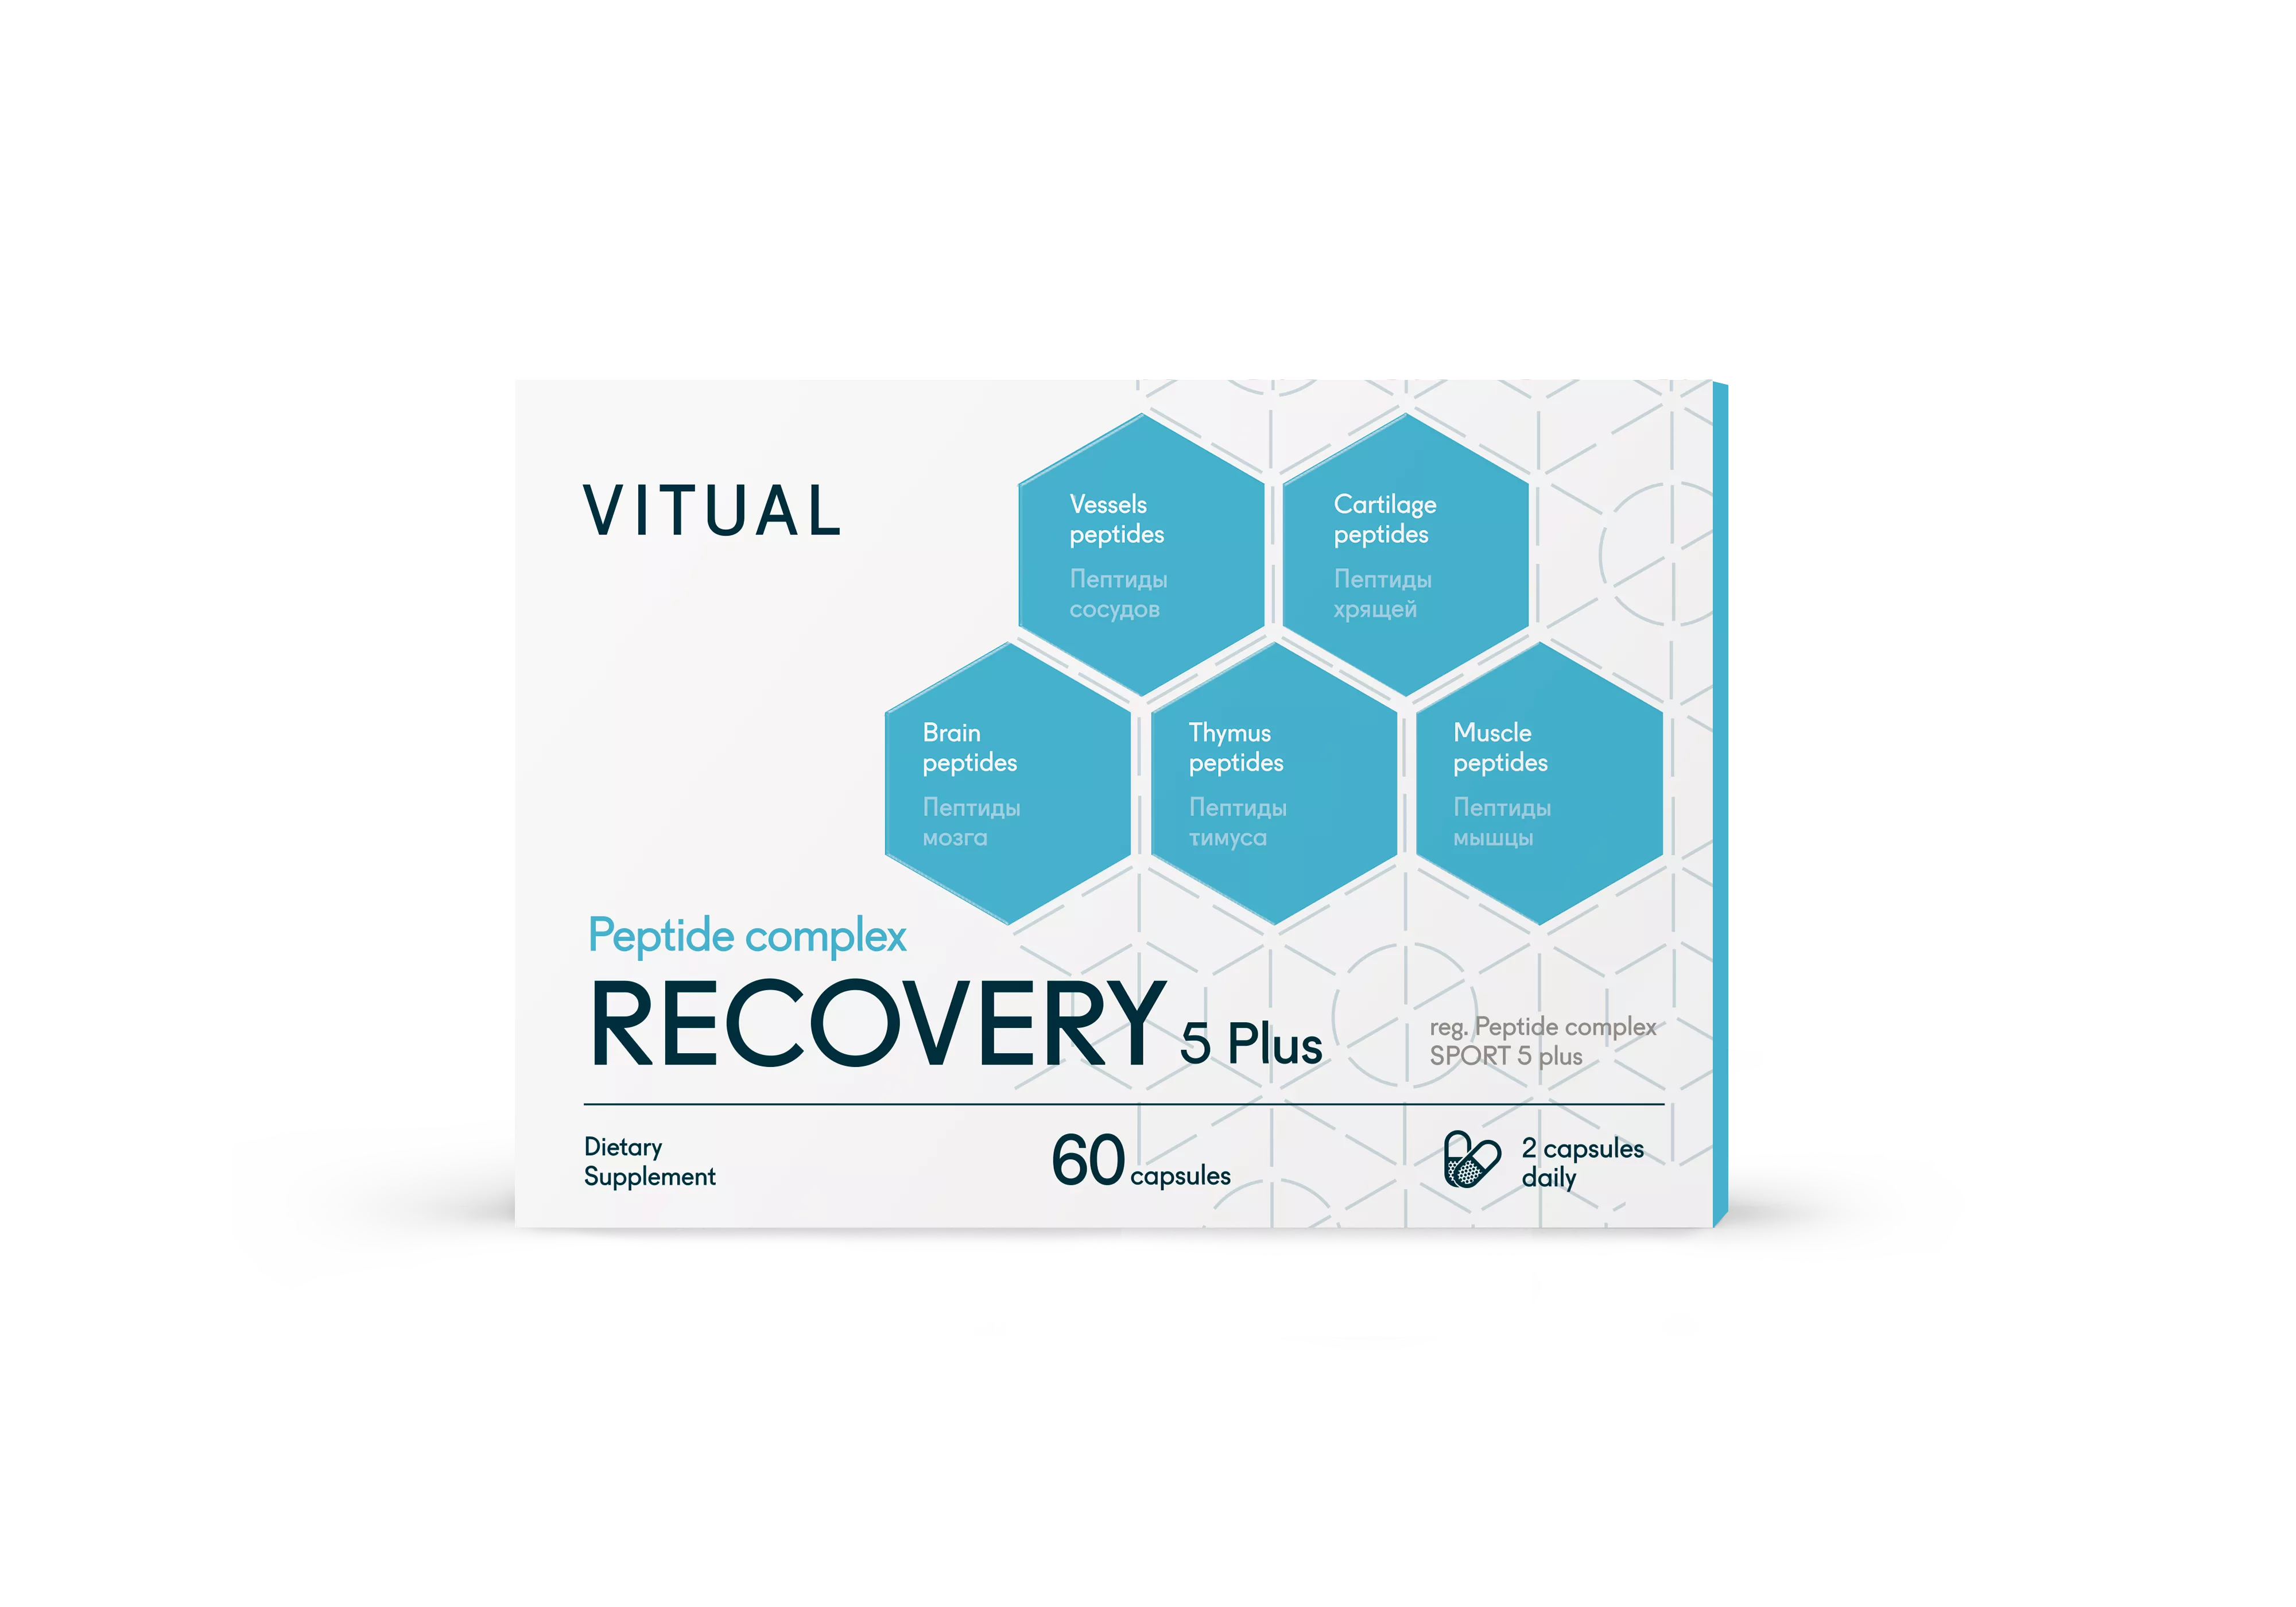 RECOVERY 5 plus